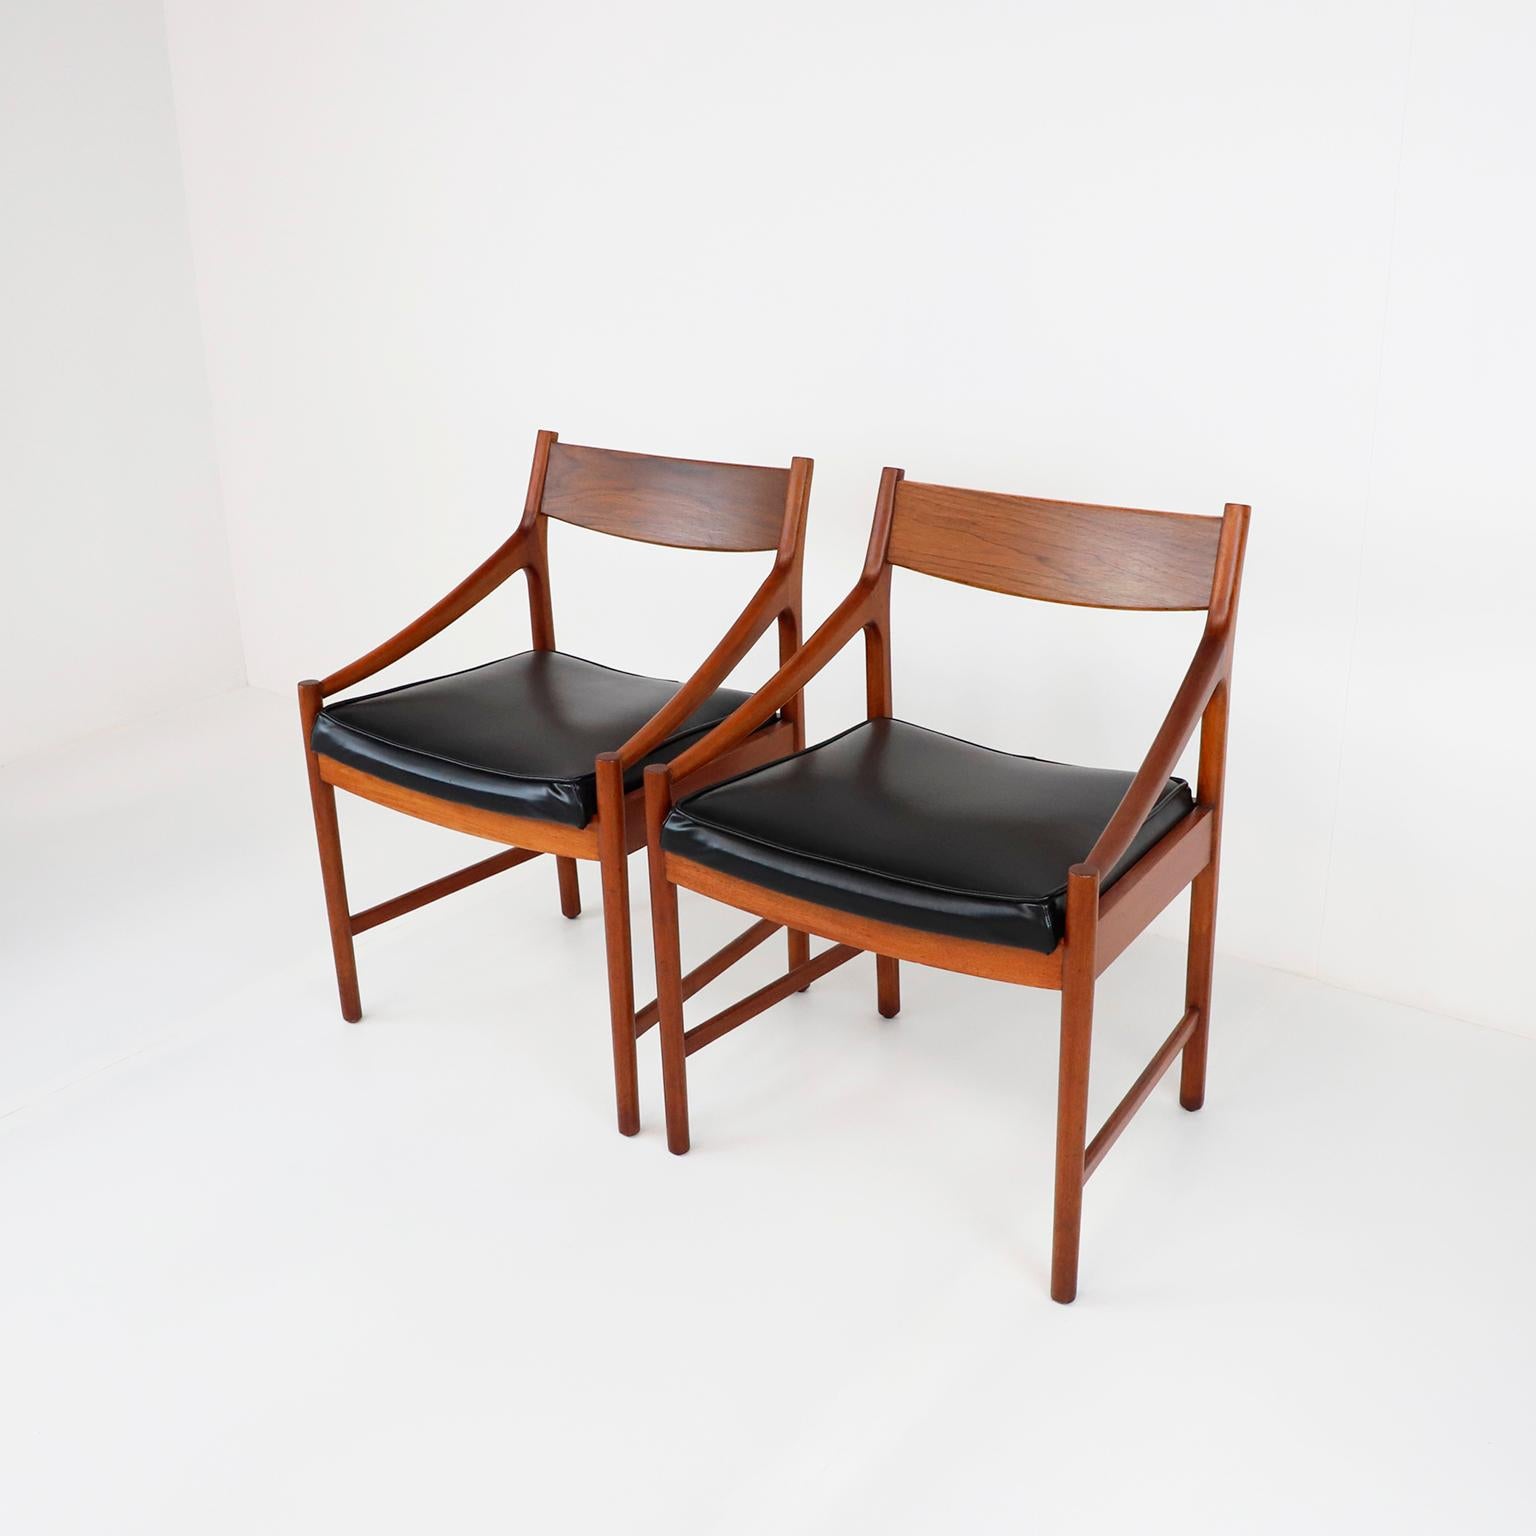 Circa 1970, we offer this set of two chairs Model Edimburgo by Michael Van Beuren, with original upholstery and brand label.

About Michael Van Beuren:

Michael Van Beuren (1911–2004) was born in New York and studied architecture at the Bauhaus